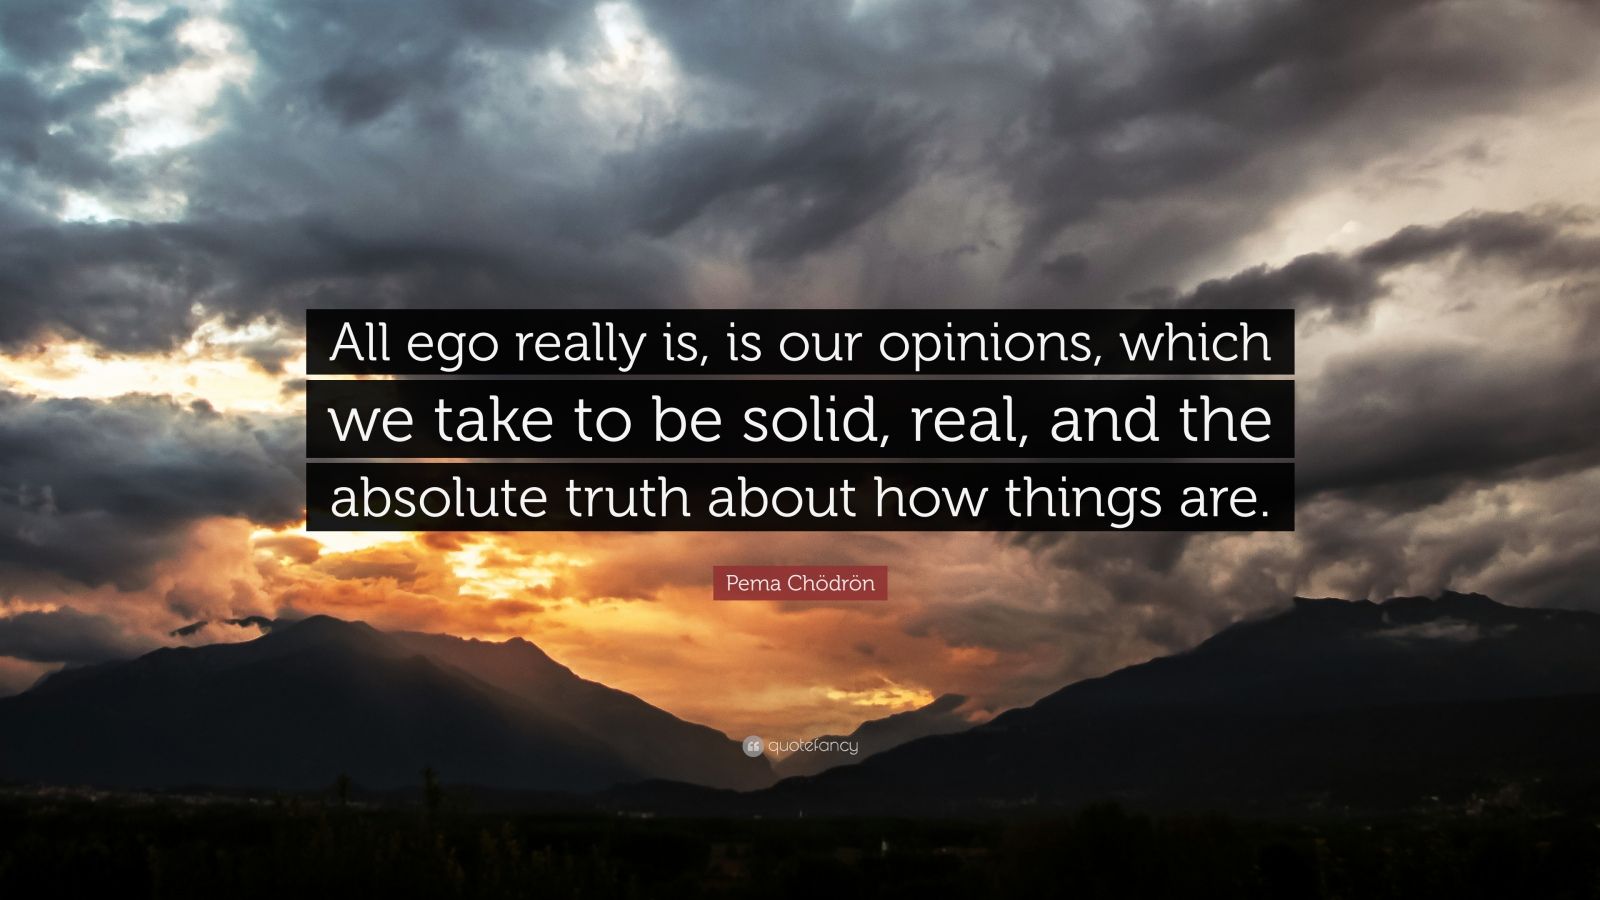 Ego Quotes (40 wallpapers) - Quotefancy